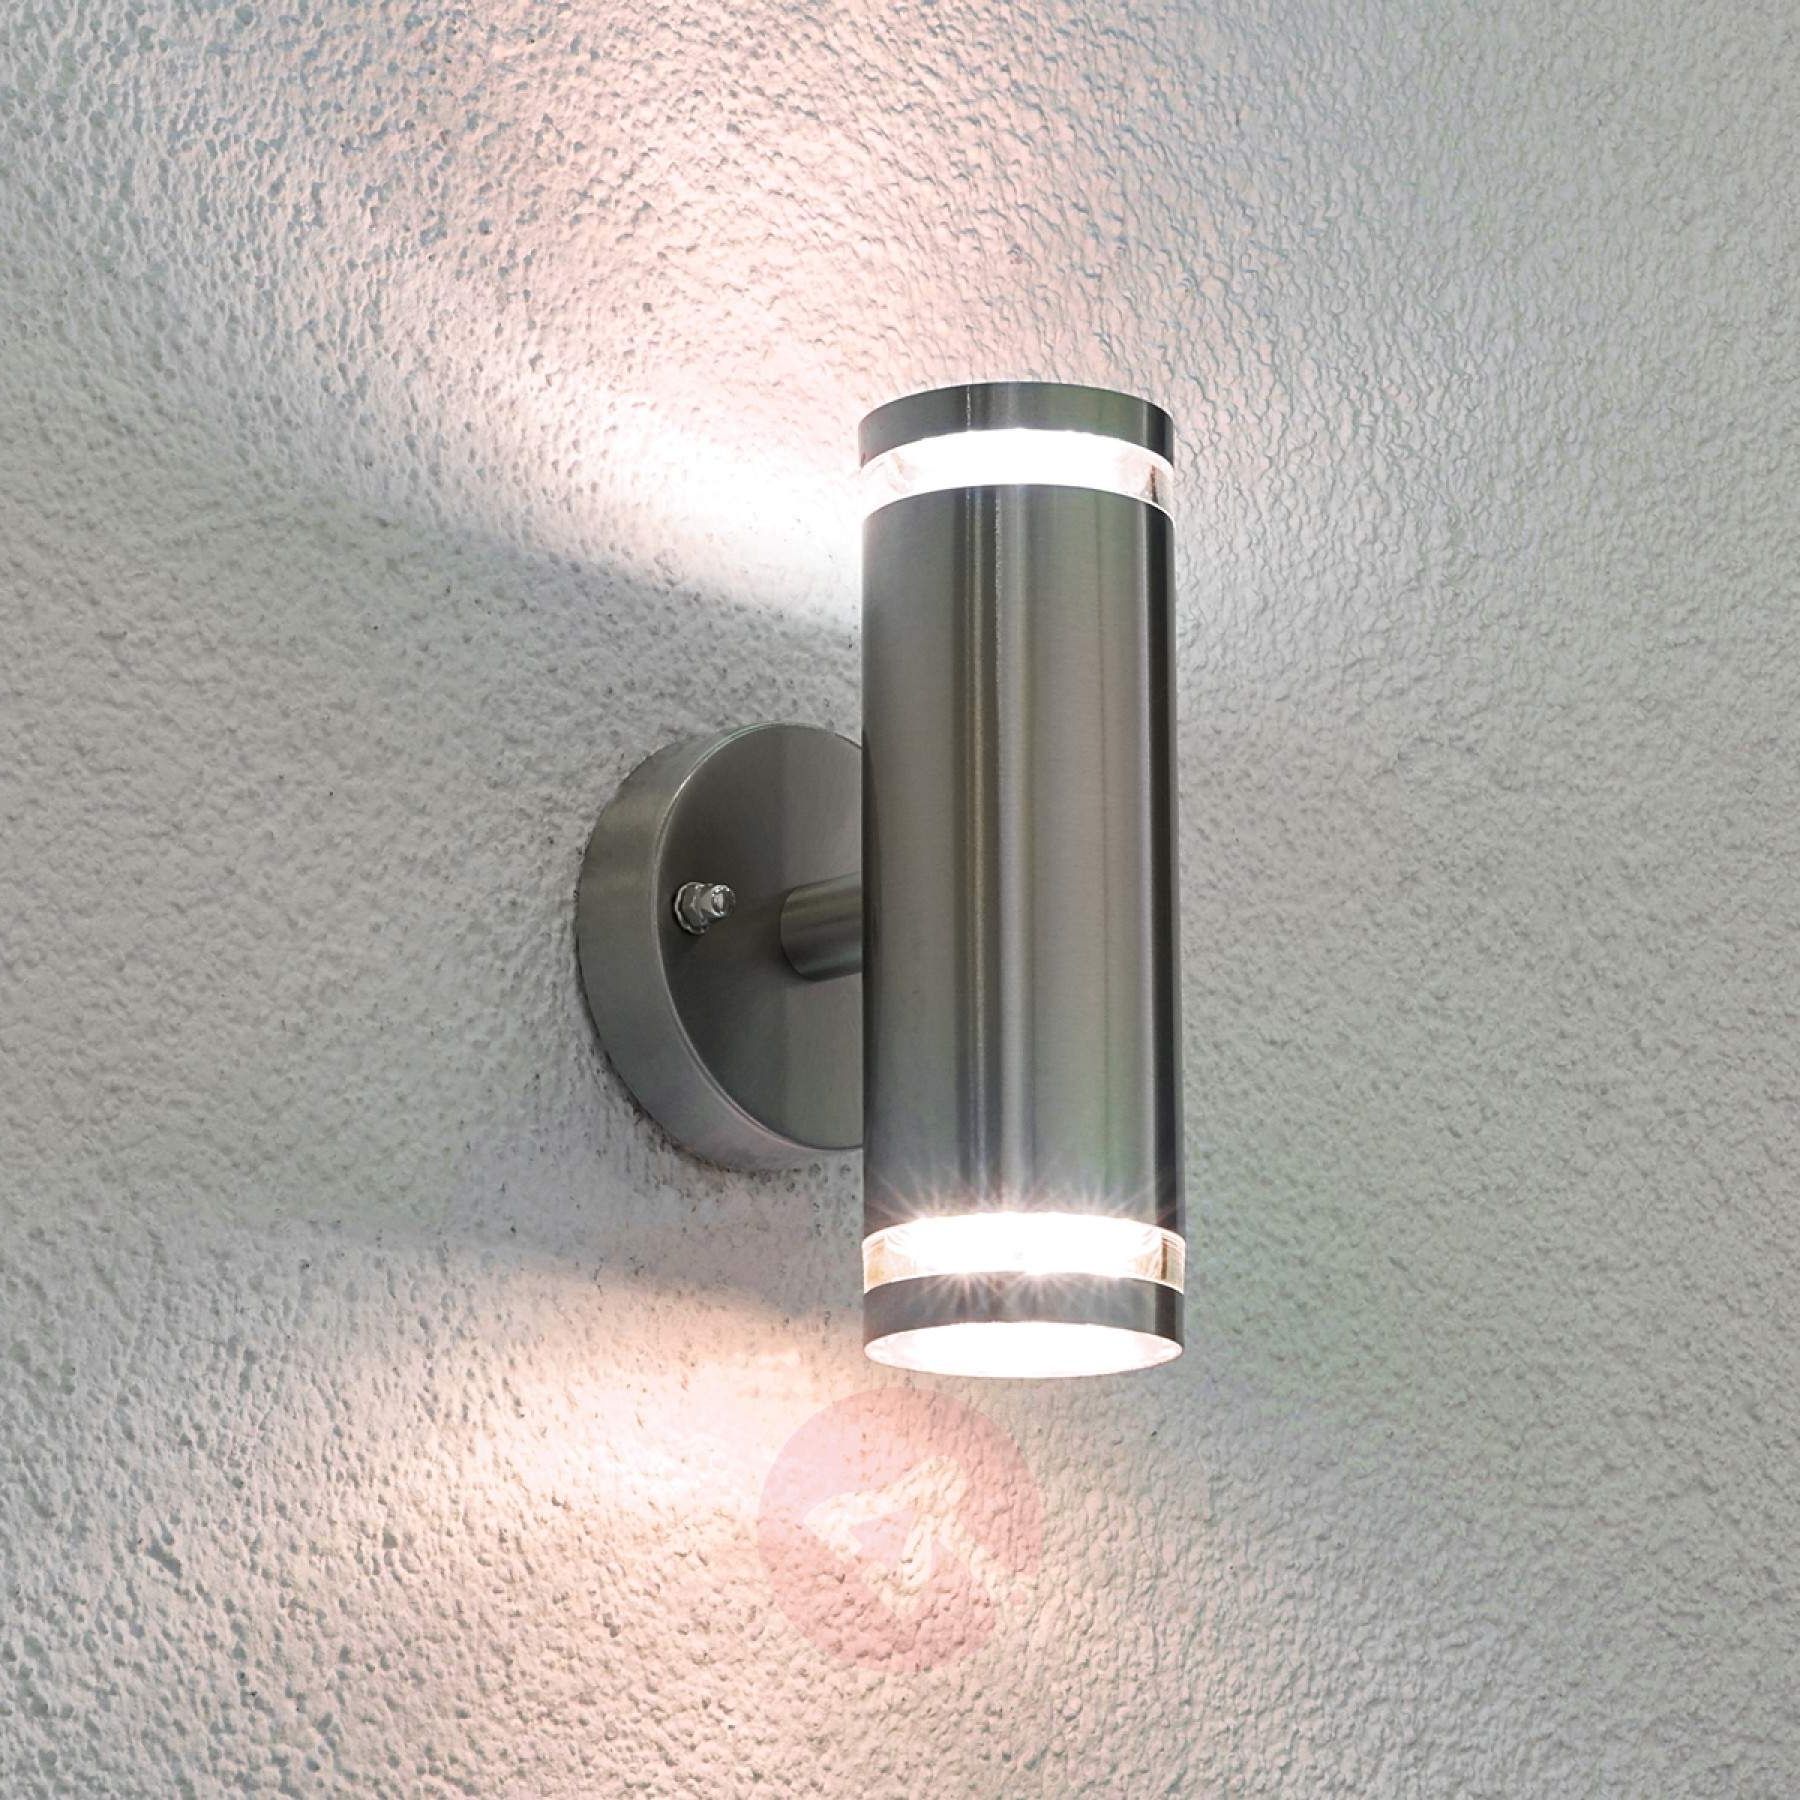 Jlncreation Regarding Most Current Outdoor Wall Lights At Gumtree (View 20 of 20)